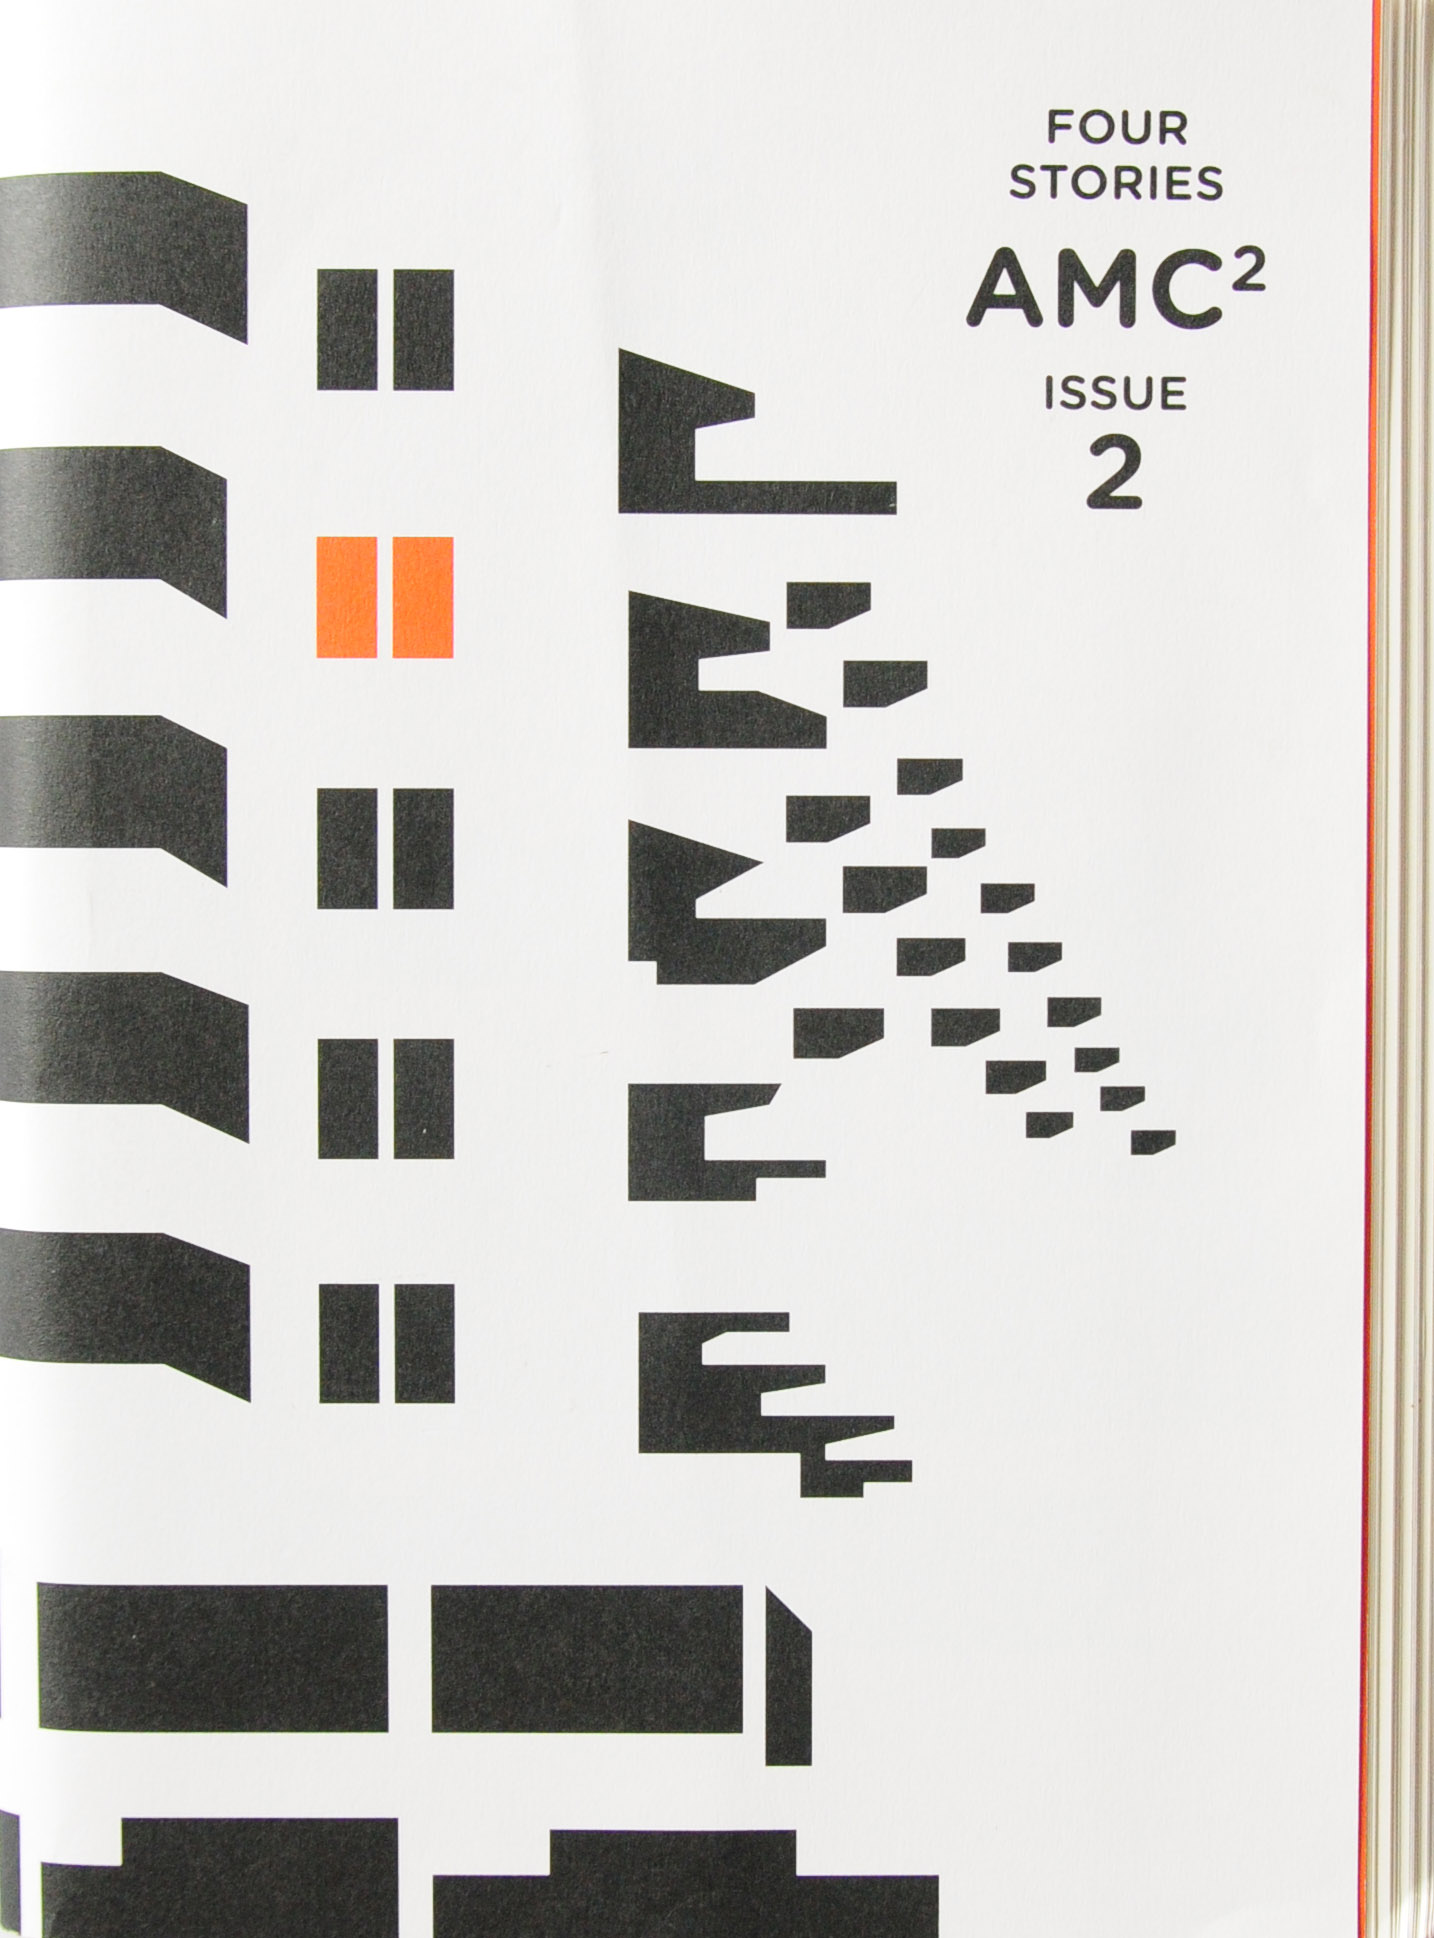 AMC2 Issue 2: Four Stories